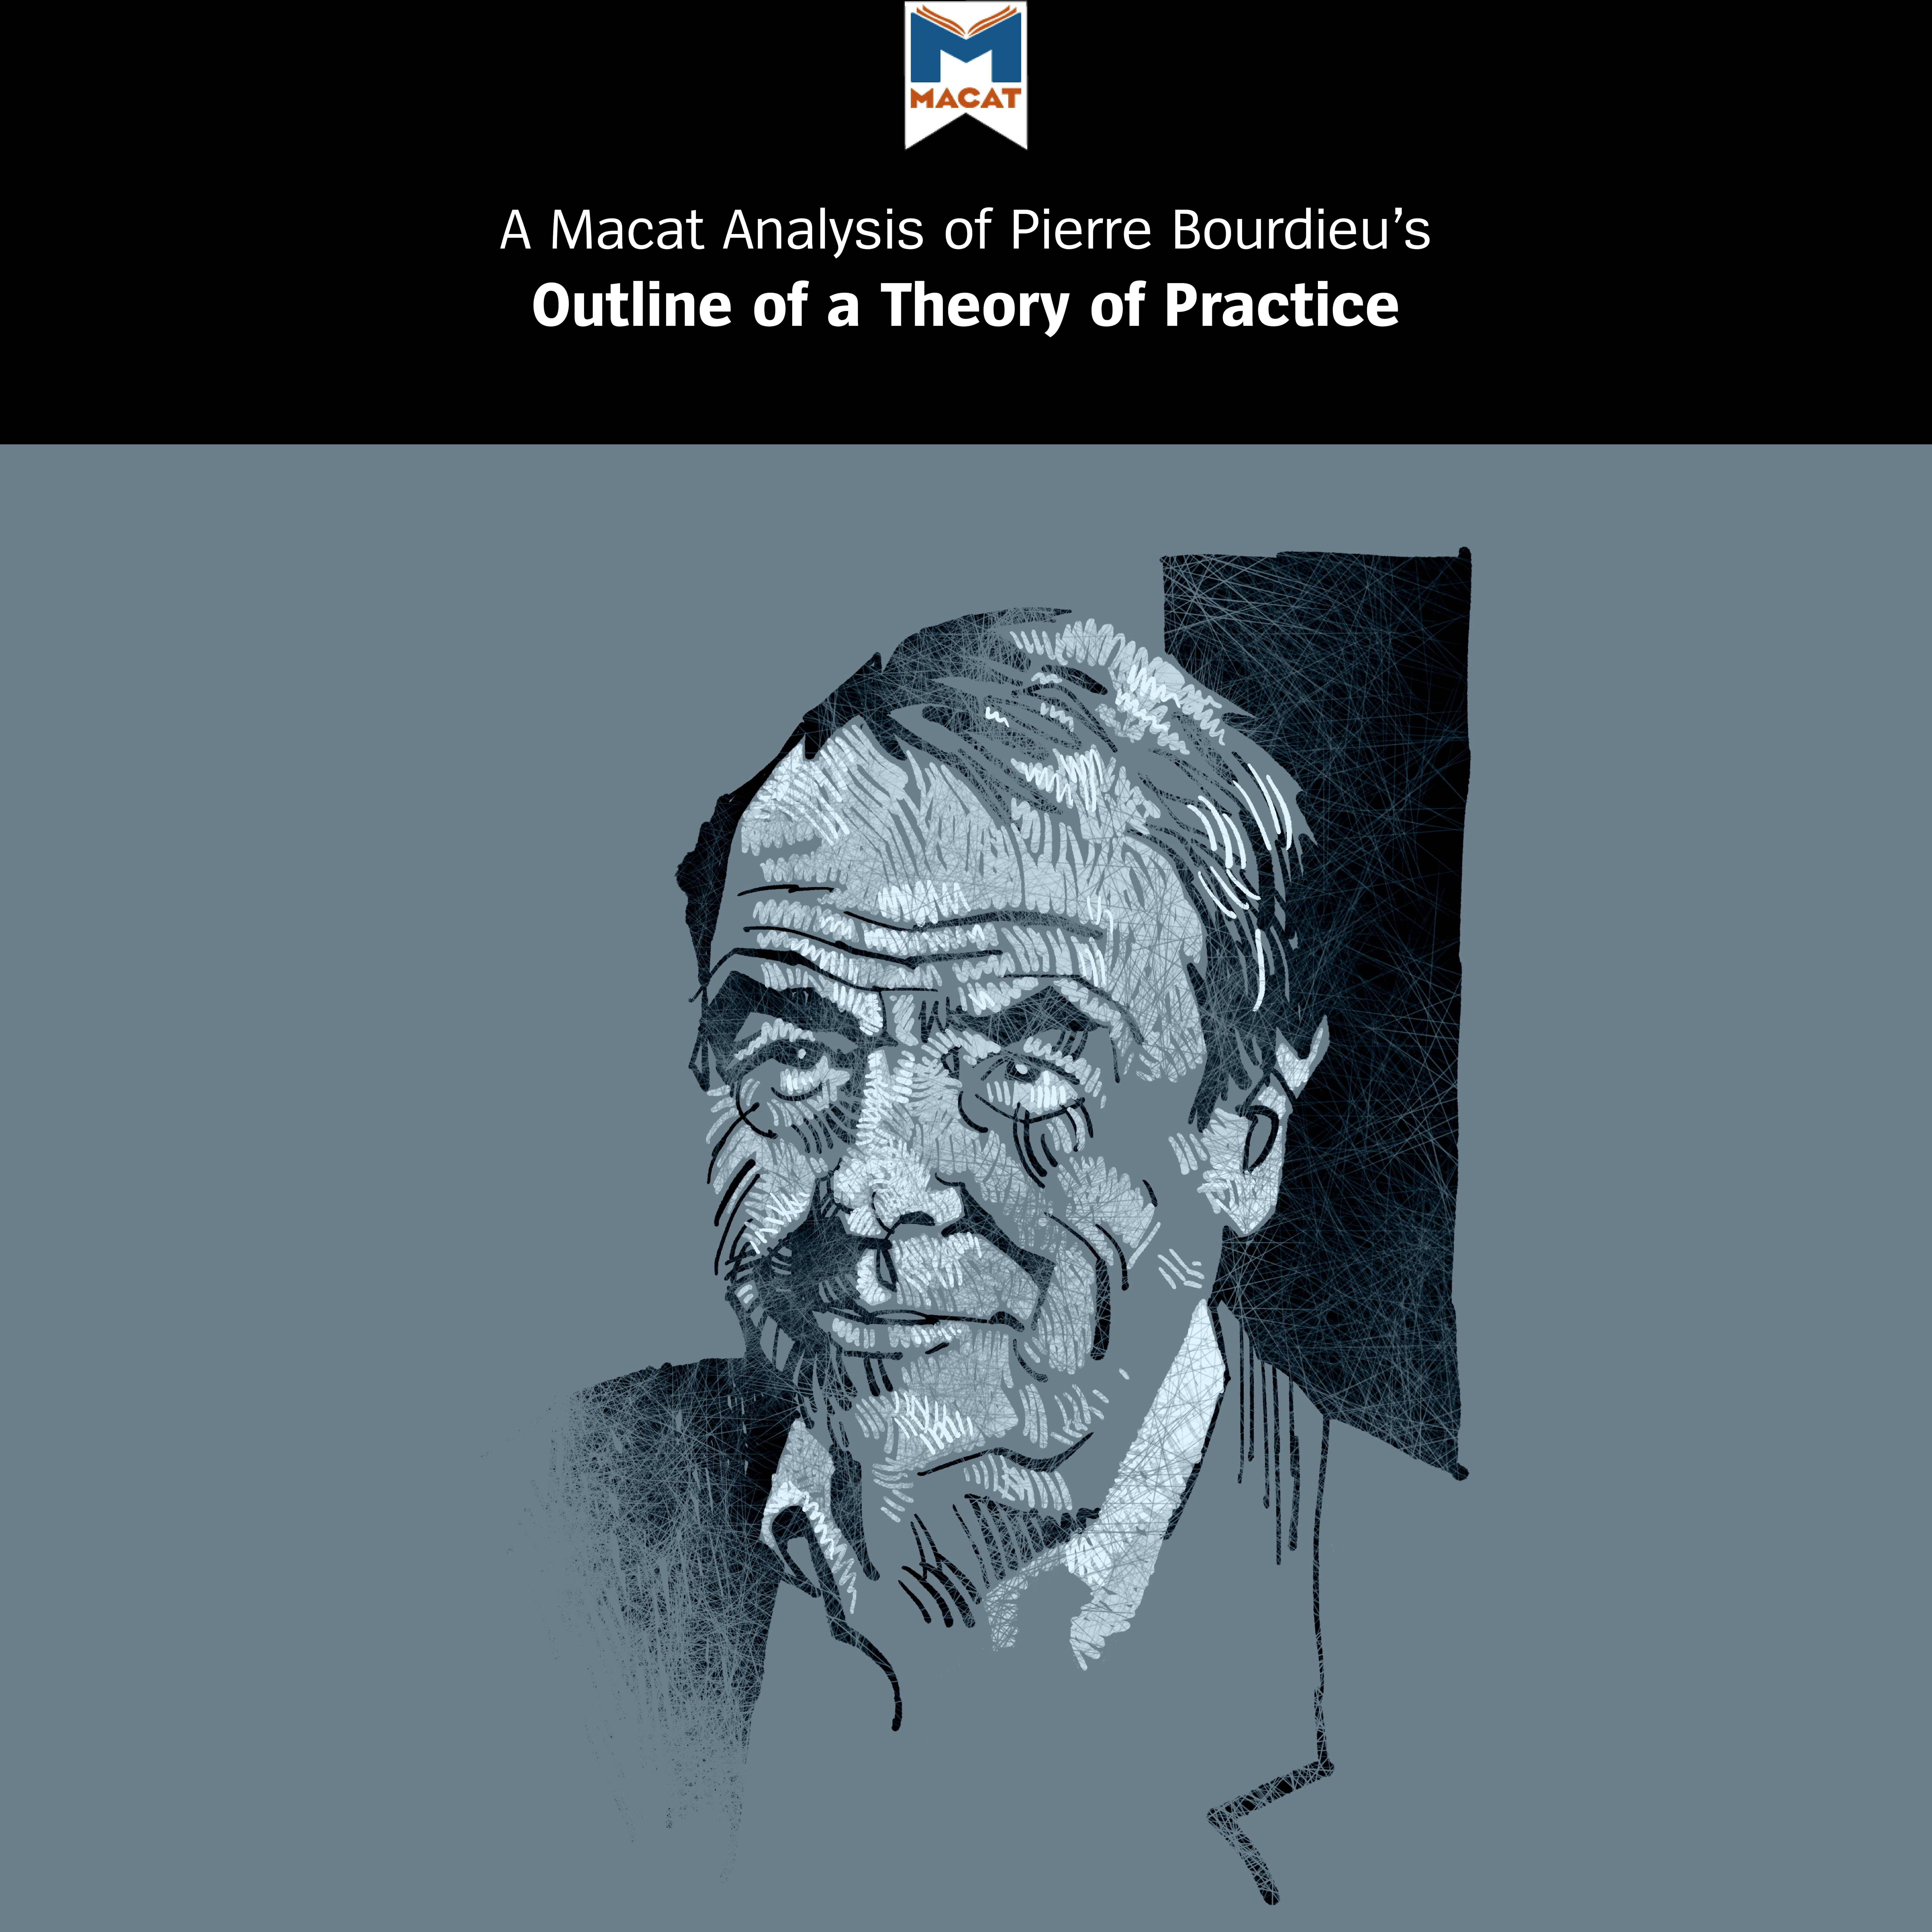 Pierre Bourdieu's "Outline of a Theory of Practice": A Macat Analysis - undefined